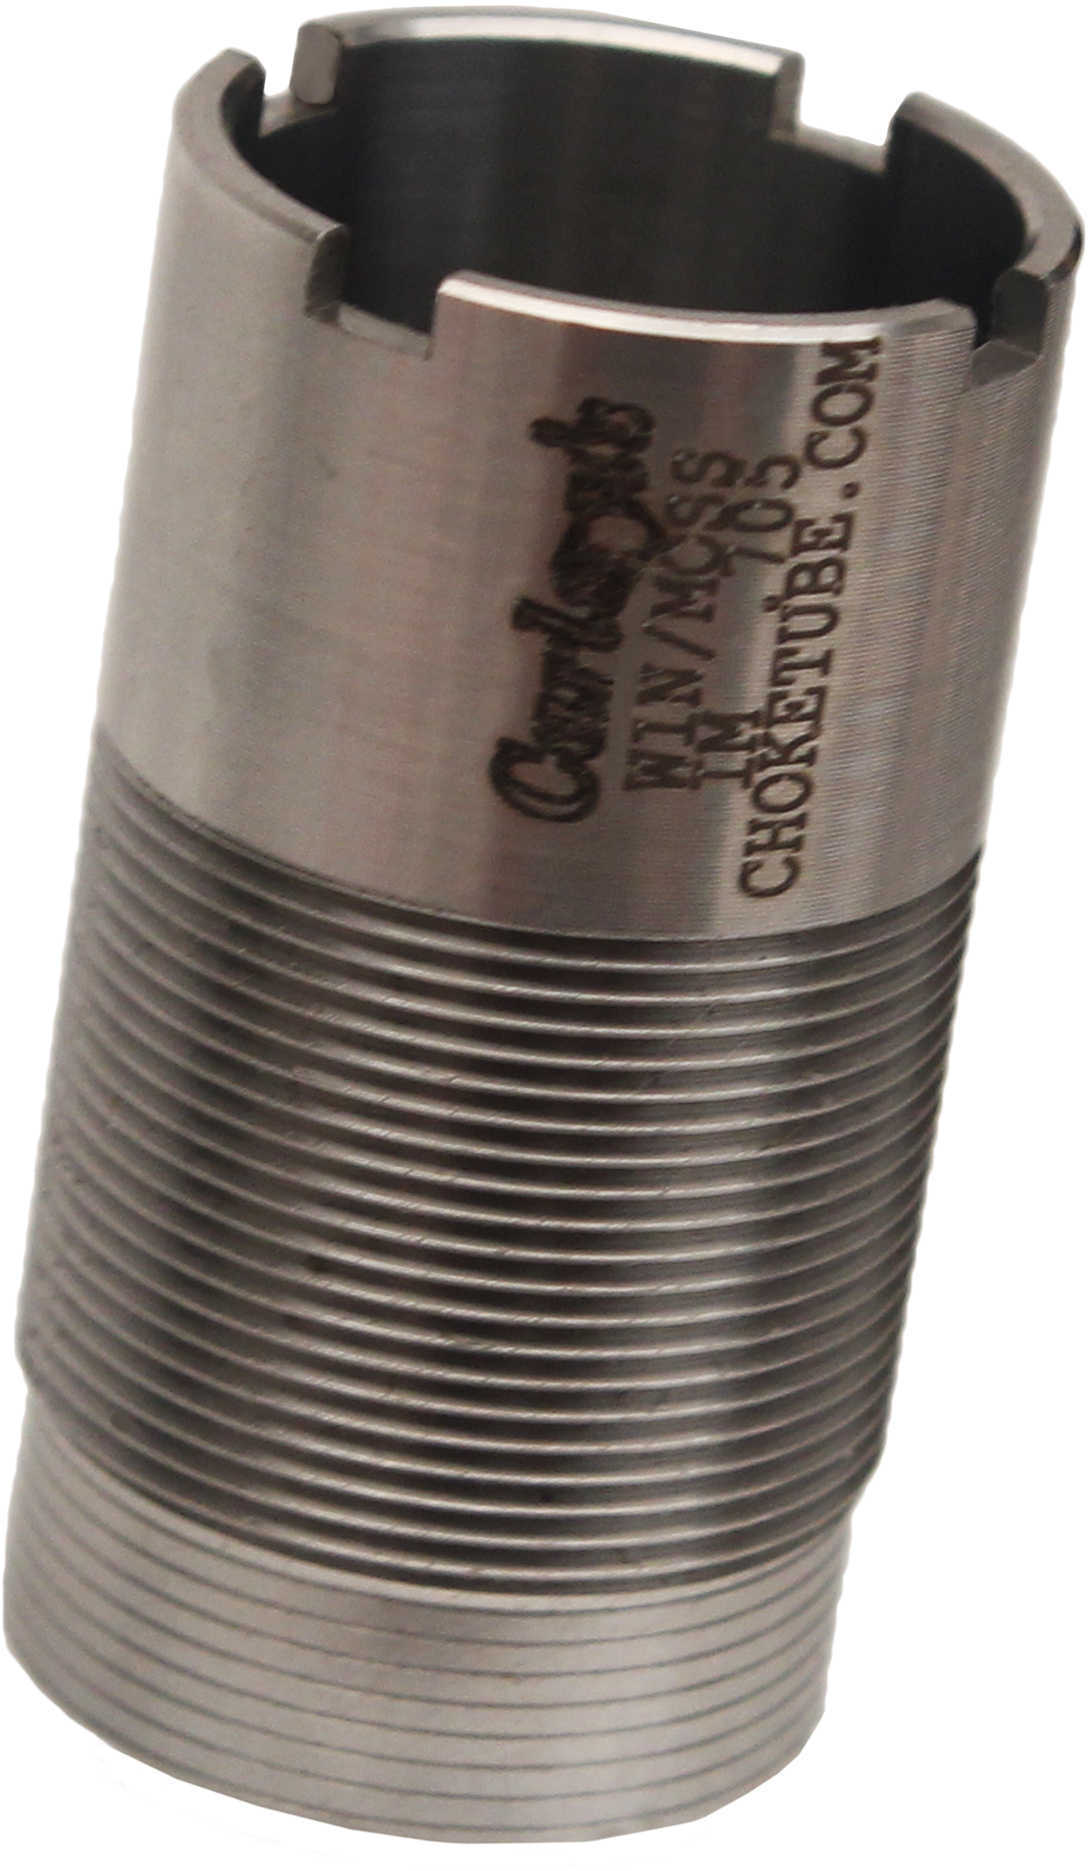 Carlson's Winchester/Mossberg/Browning/Weatherby Flush Mount Choke Tubes 12 Gauge, Improved Modified .705 Md: 12214